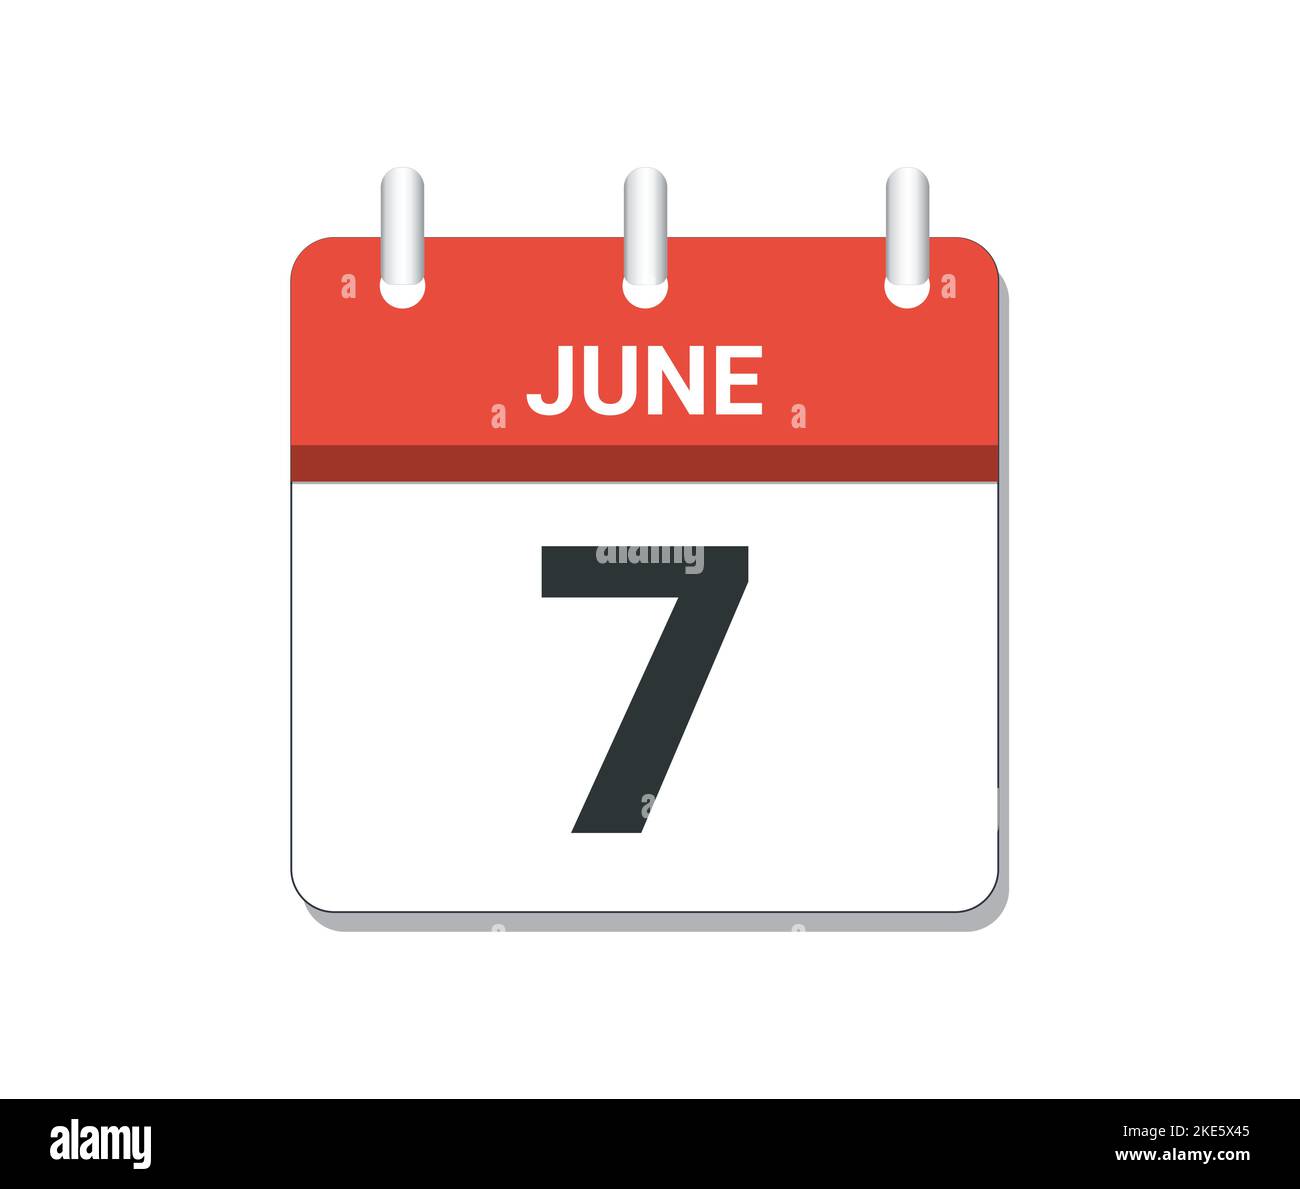 June 7th calendar icon vector. Concept of schedule, business and tasks Stock Vector